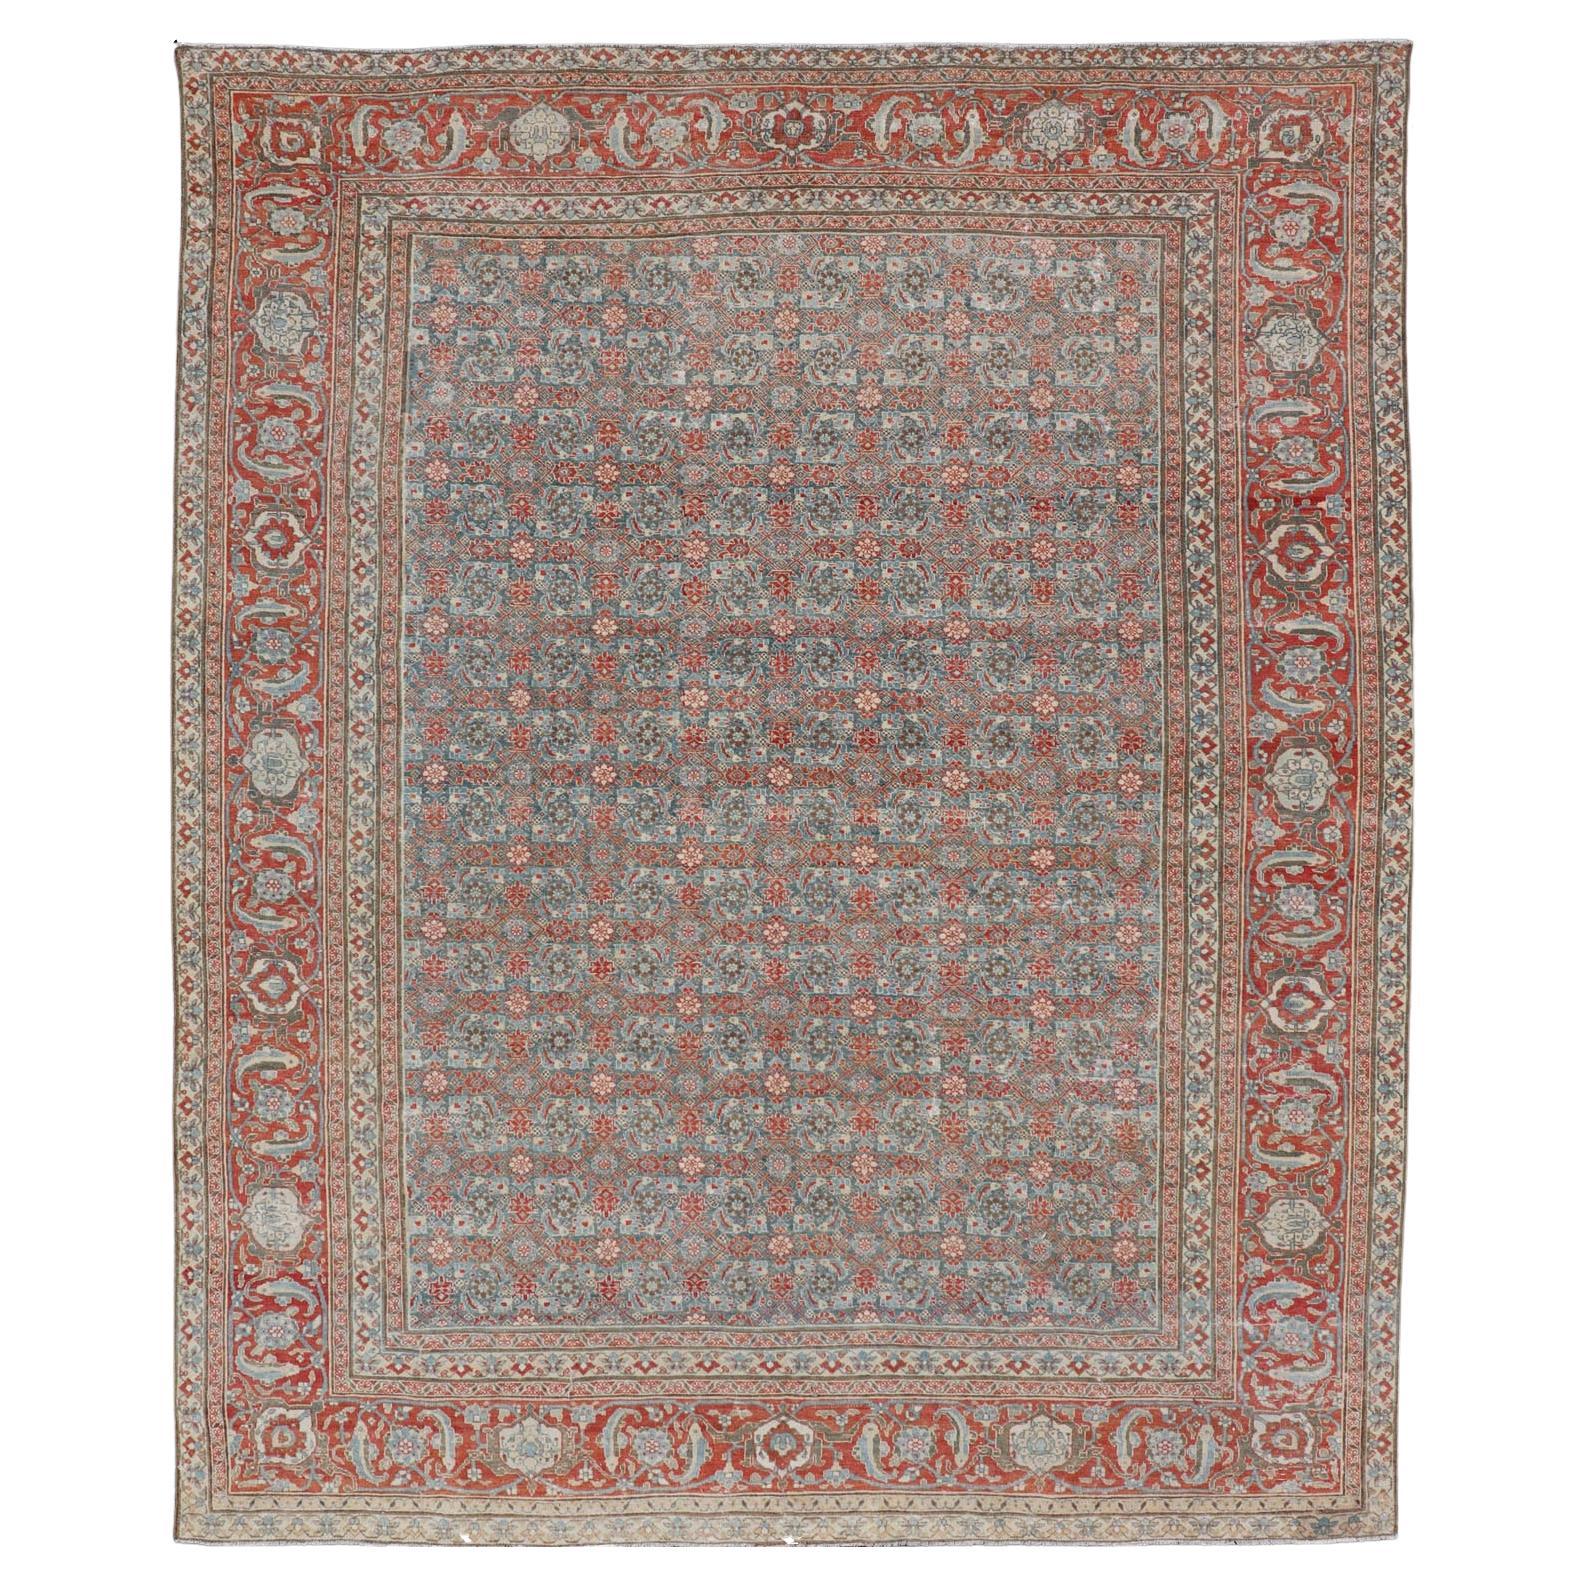 Antique Persian Fine Weave Senneh Rug with All-Over Herati Design on Blue Field 